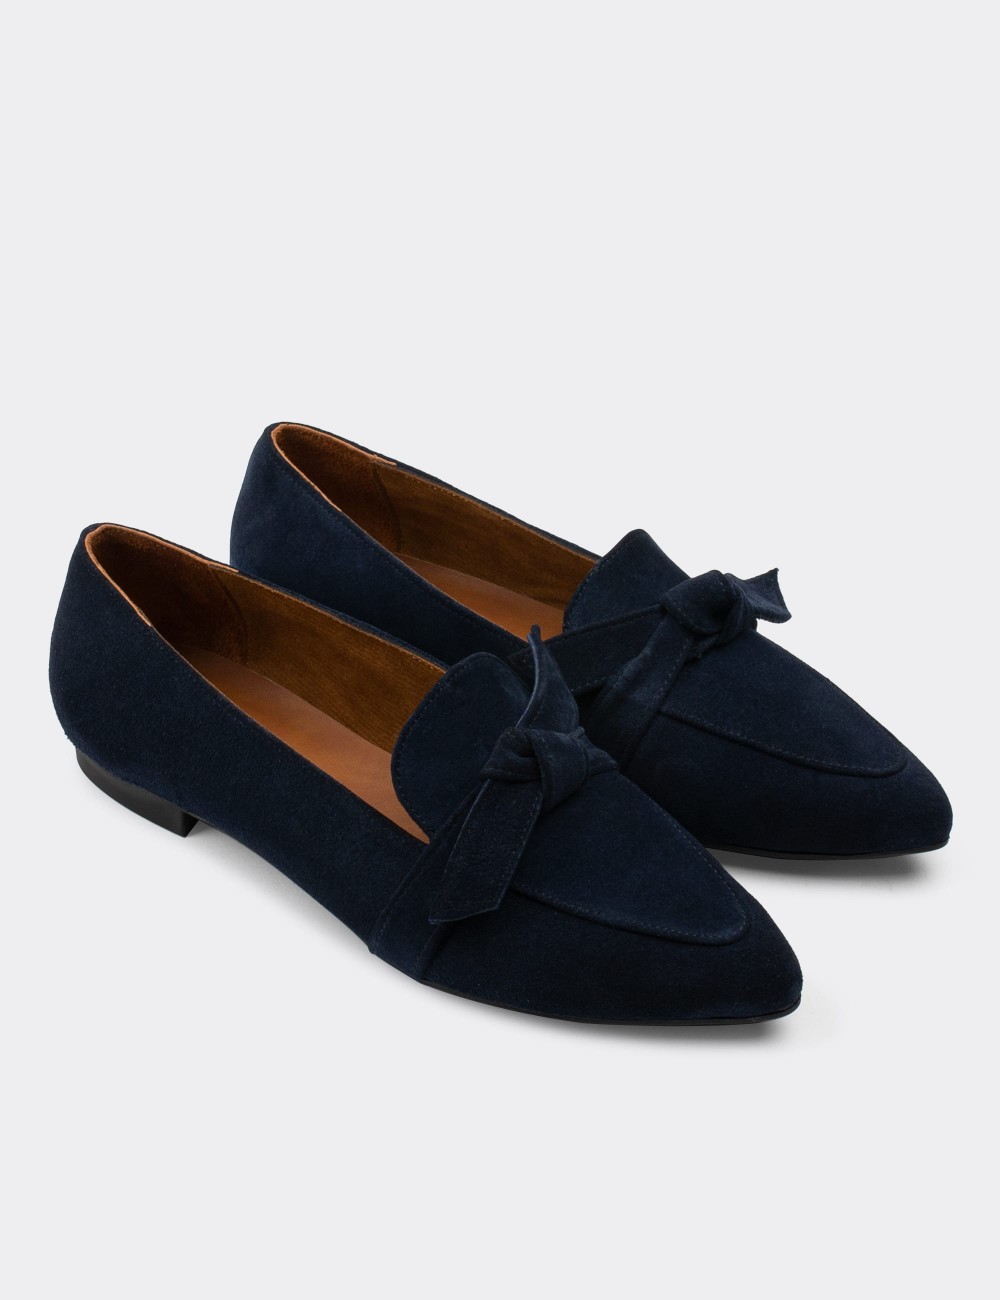 Navy Suede Leather Loafers - 01898ZLCVC01